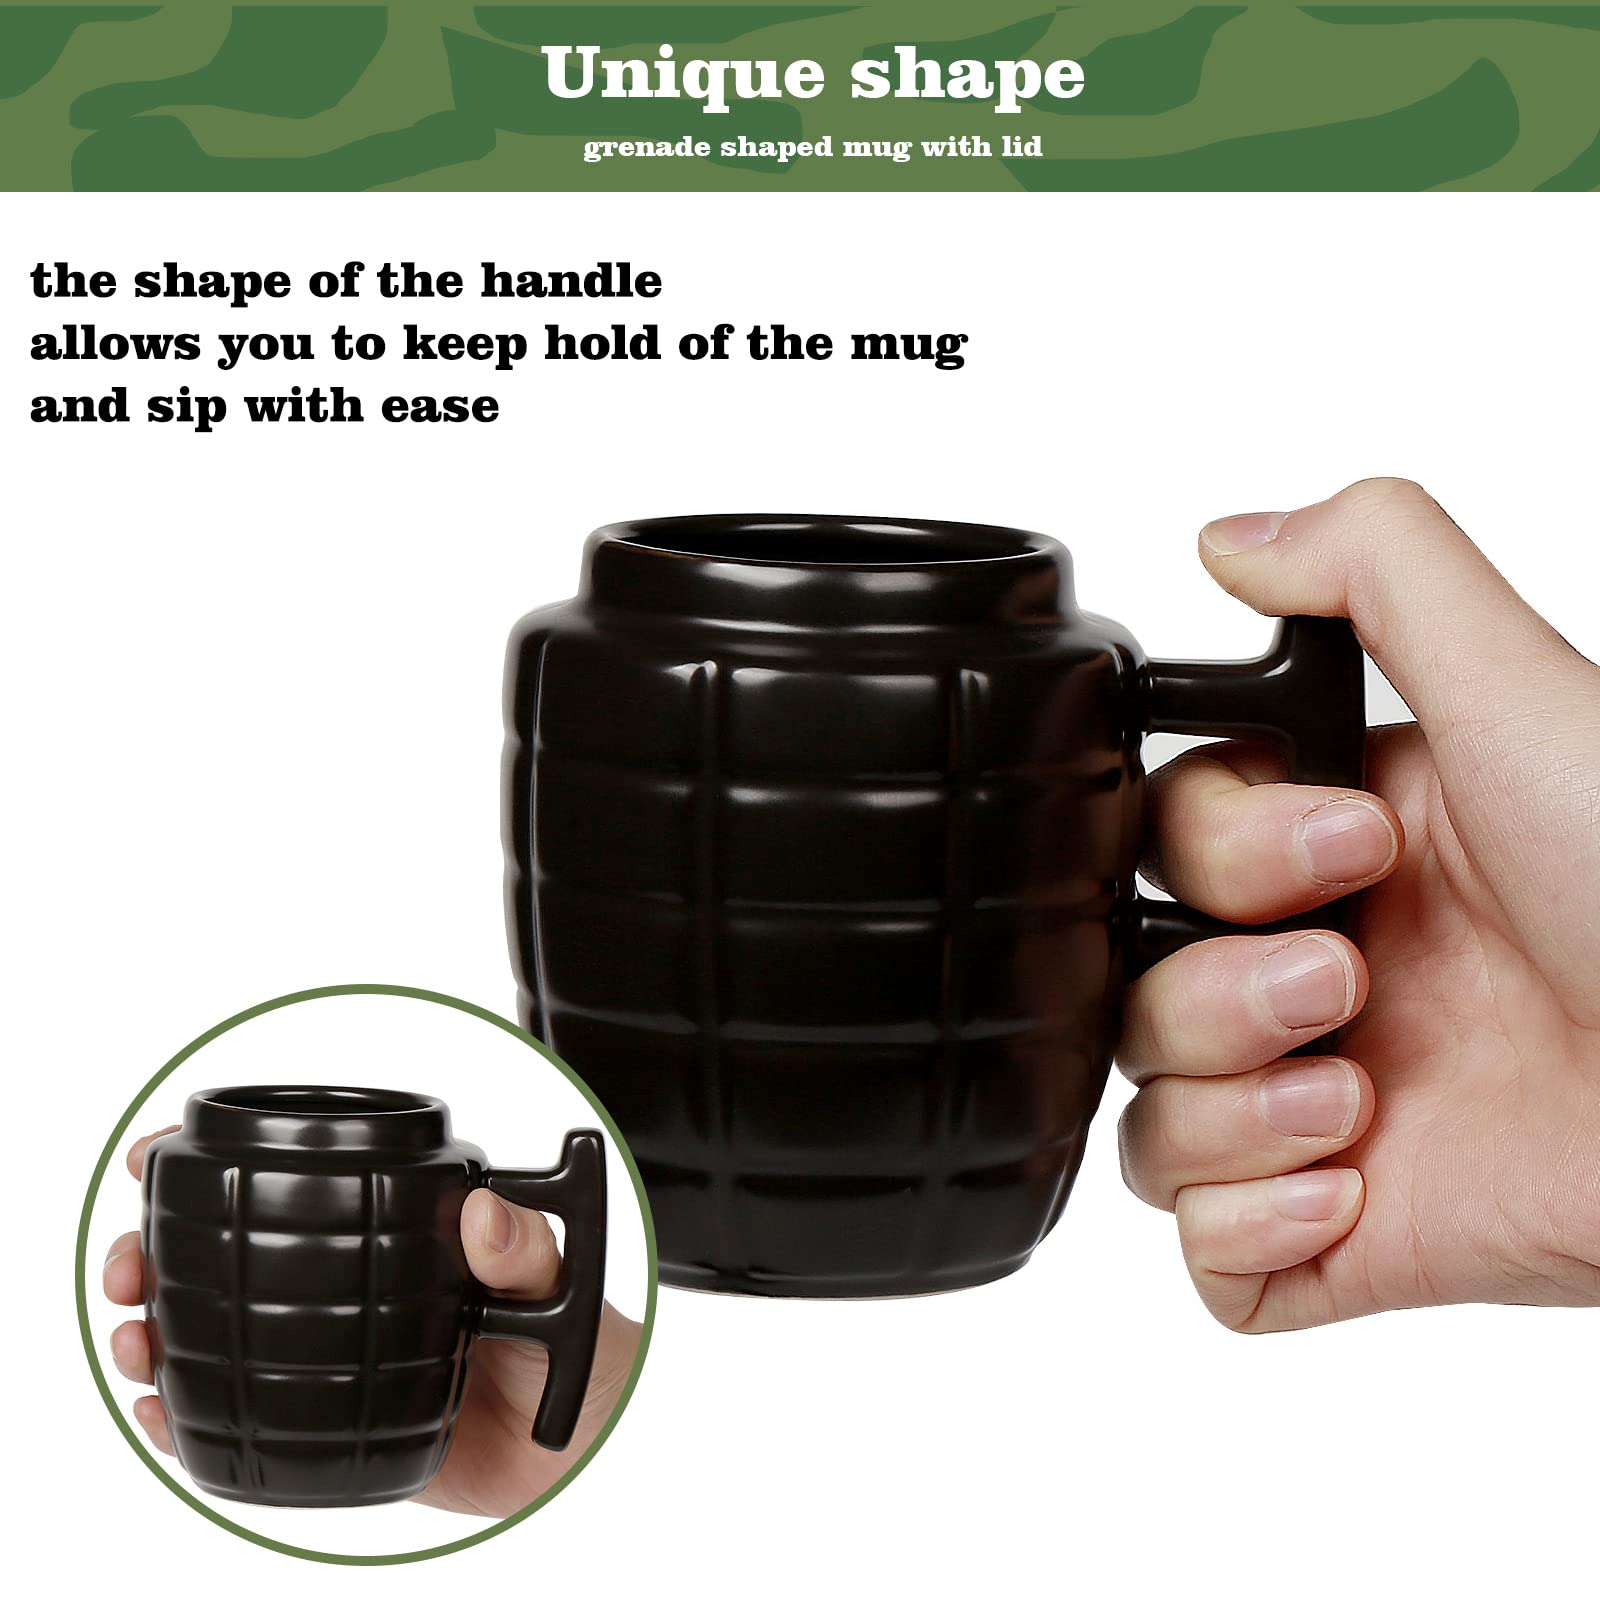 loobuu Fashion Ceramic Coffee Tea Cup, Special Cool Coffee Mug 3D Cool Grenade Design Durable Coffee Tea Cup Attractive Mugs Personalized Porcelain Gifts for Men Women- 9.4OZ (Grenade)